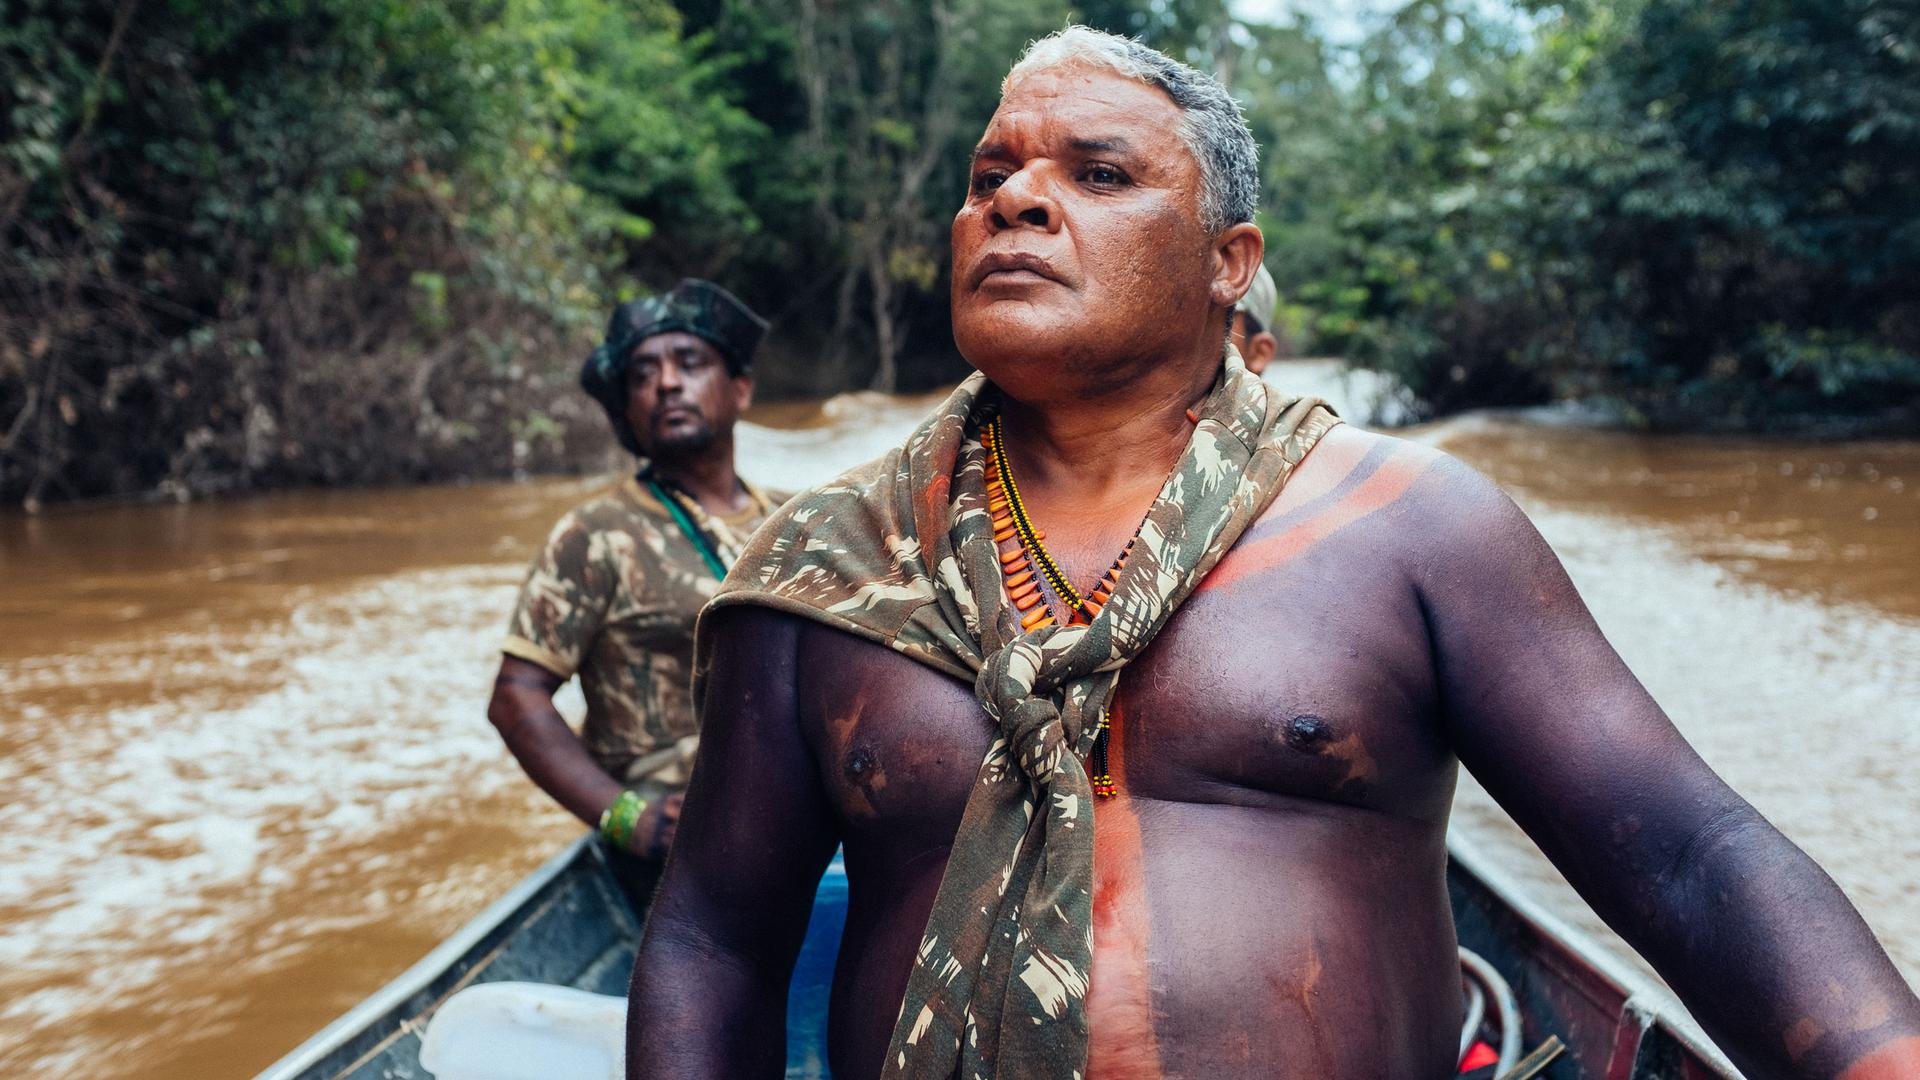 A barechested man wearing beads and body paint sits in a motorboat as it speeds through a muddy river